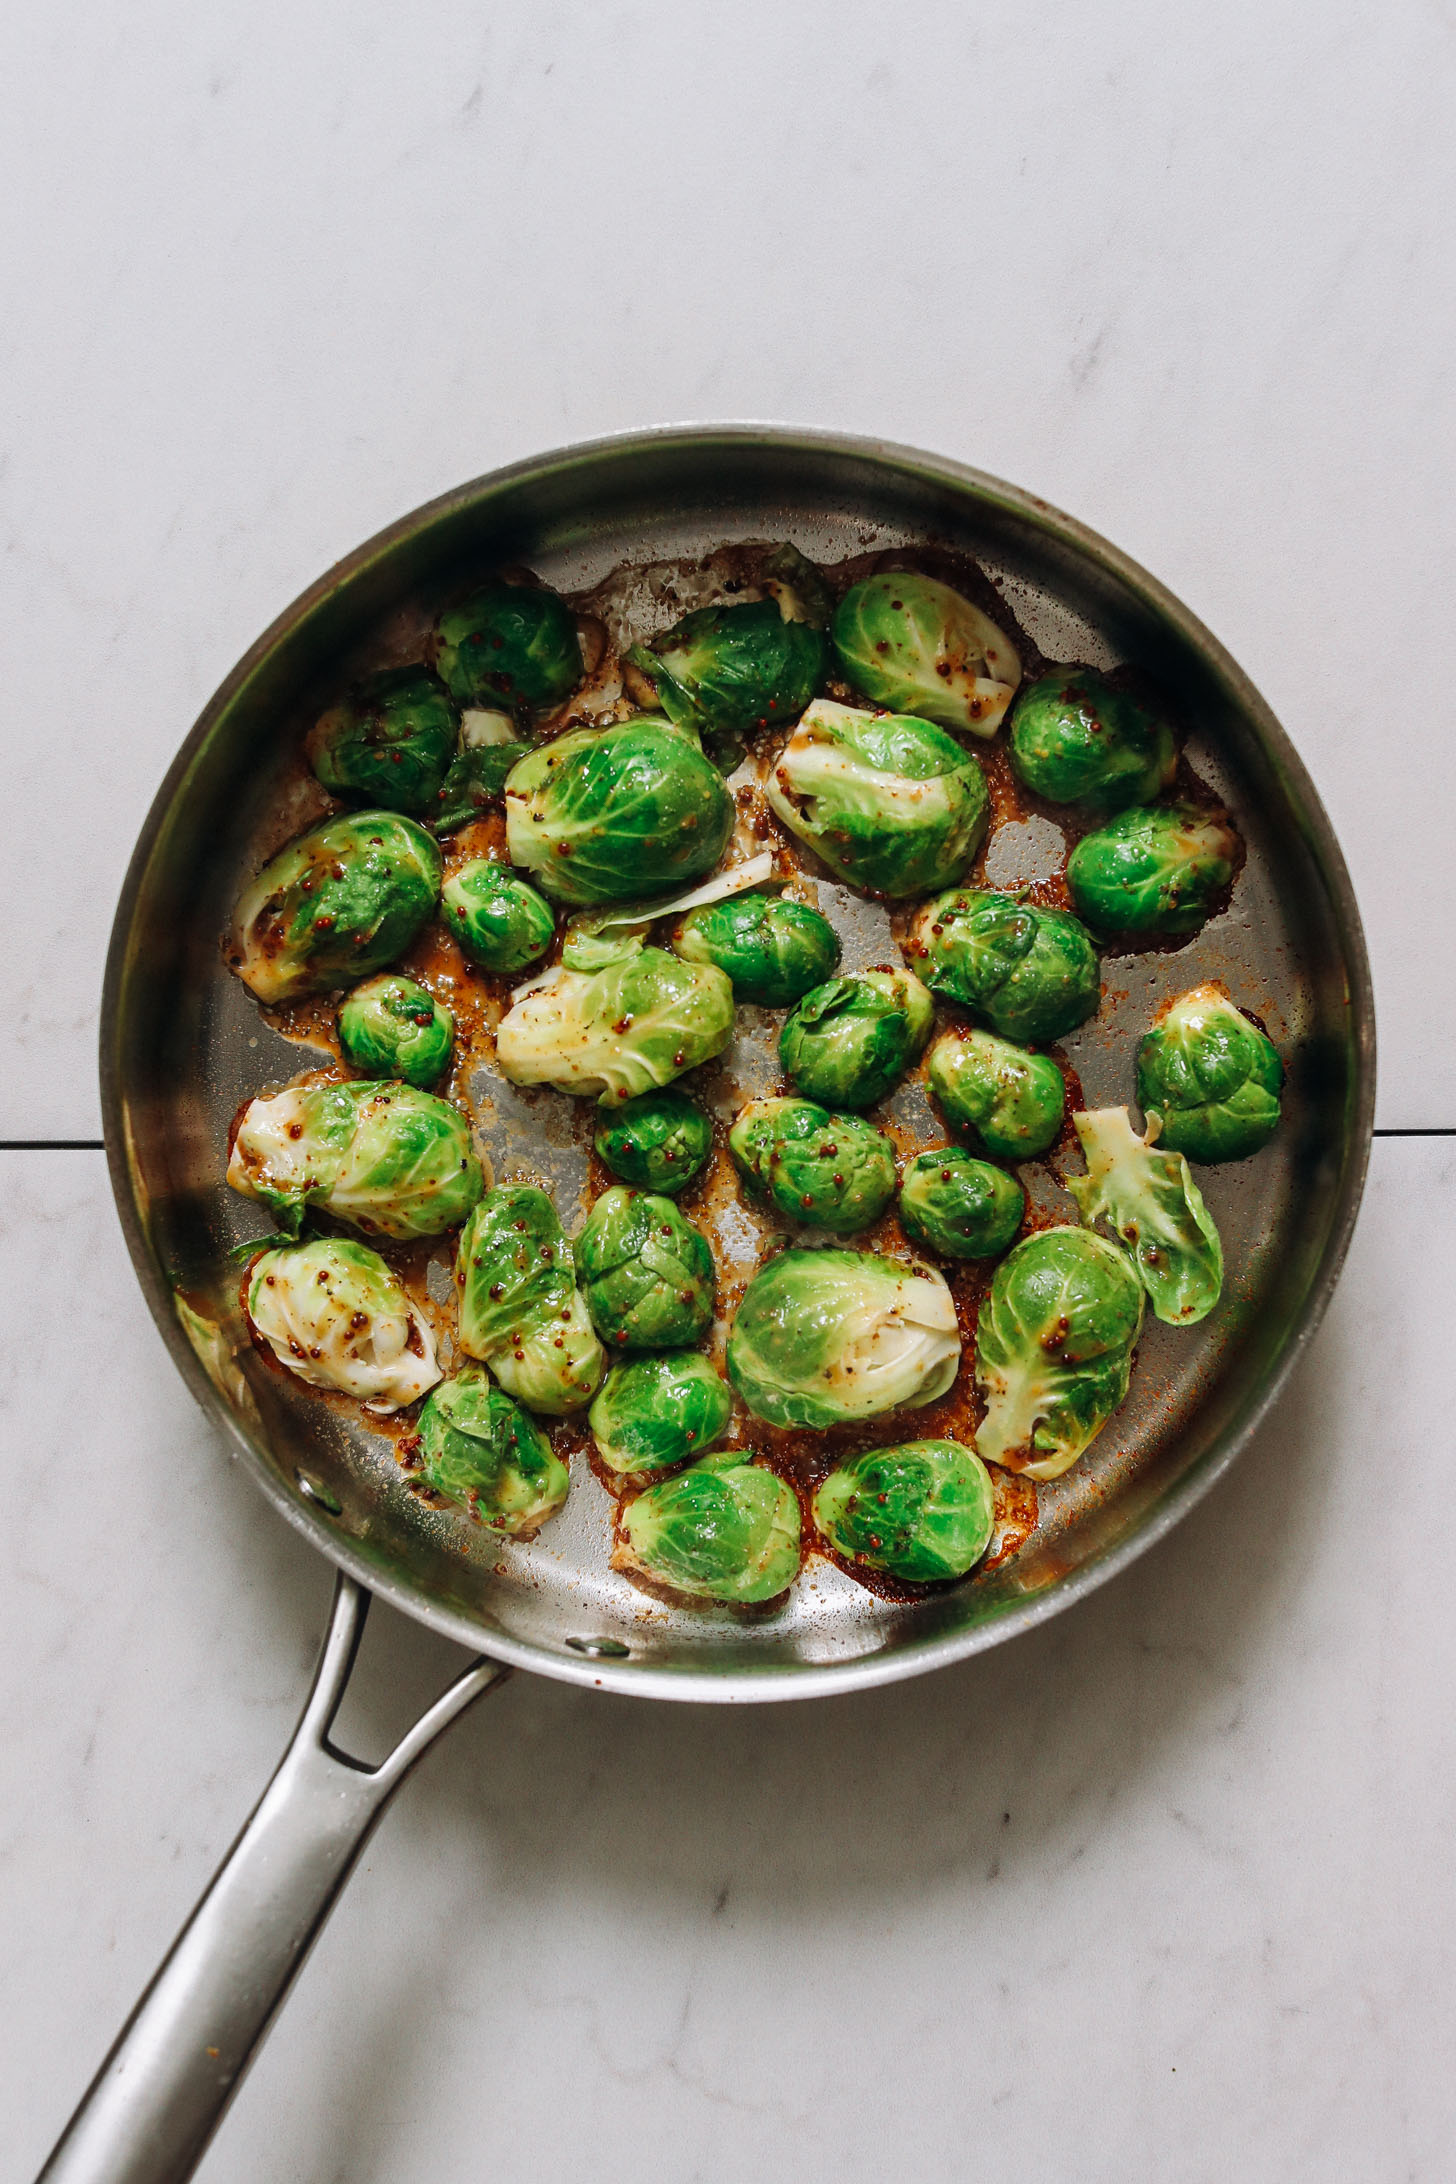 Cooking Brussels sprouts cut side down in a pan